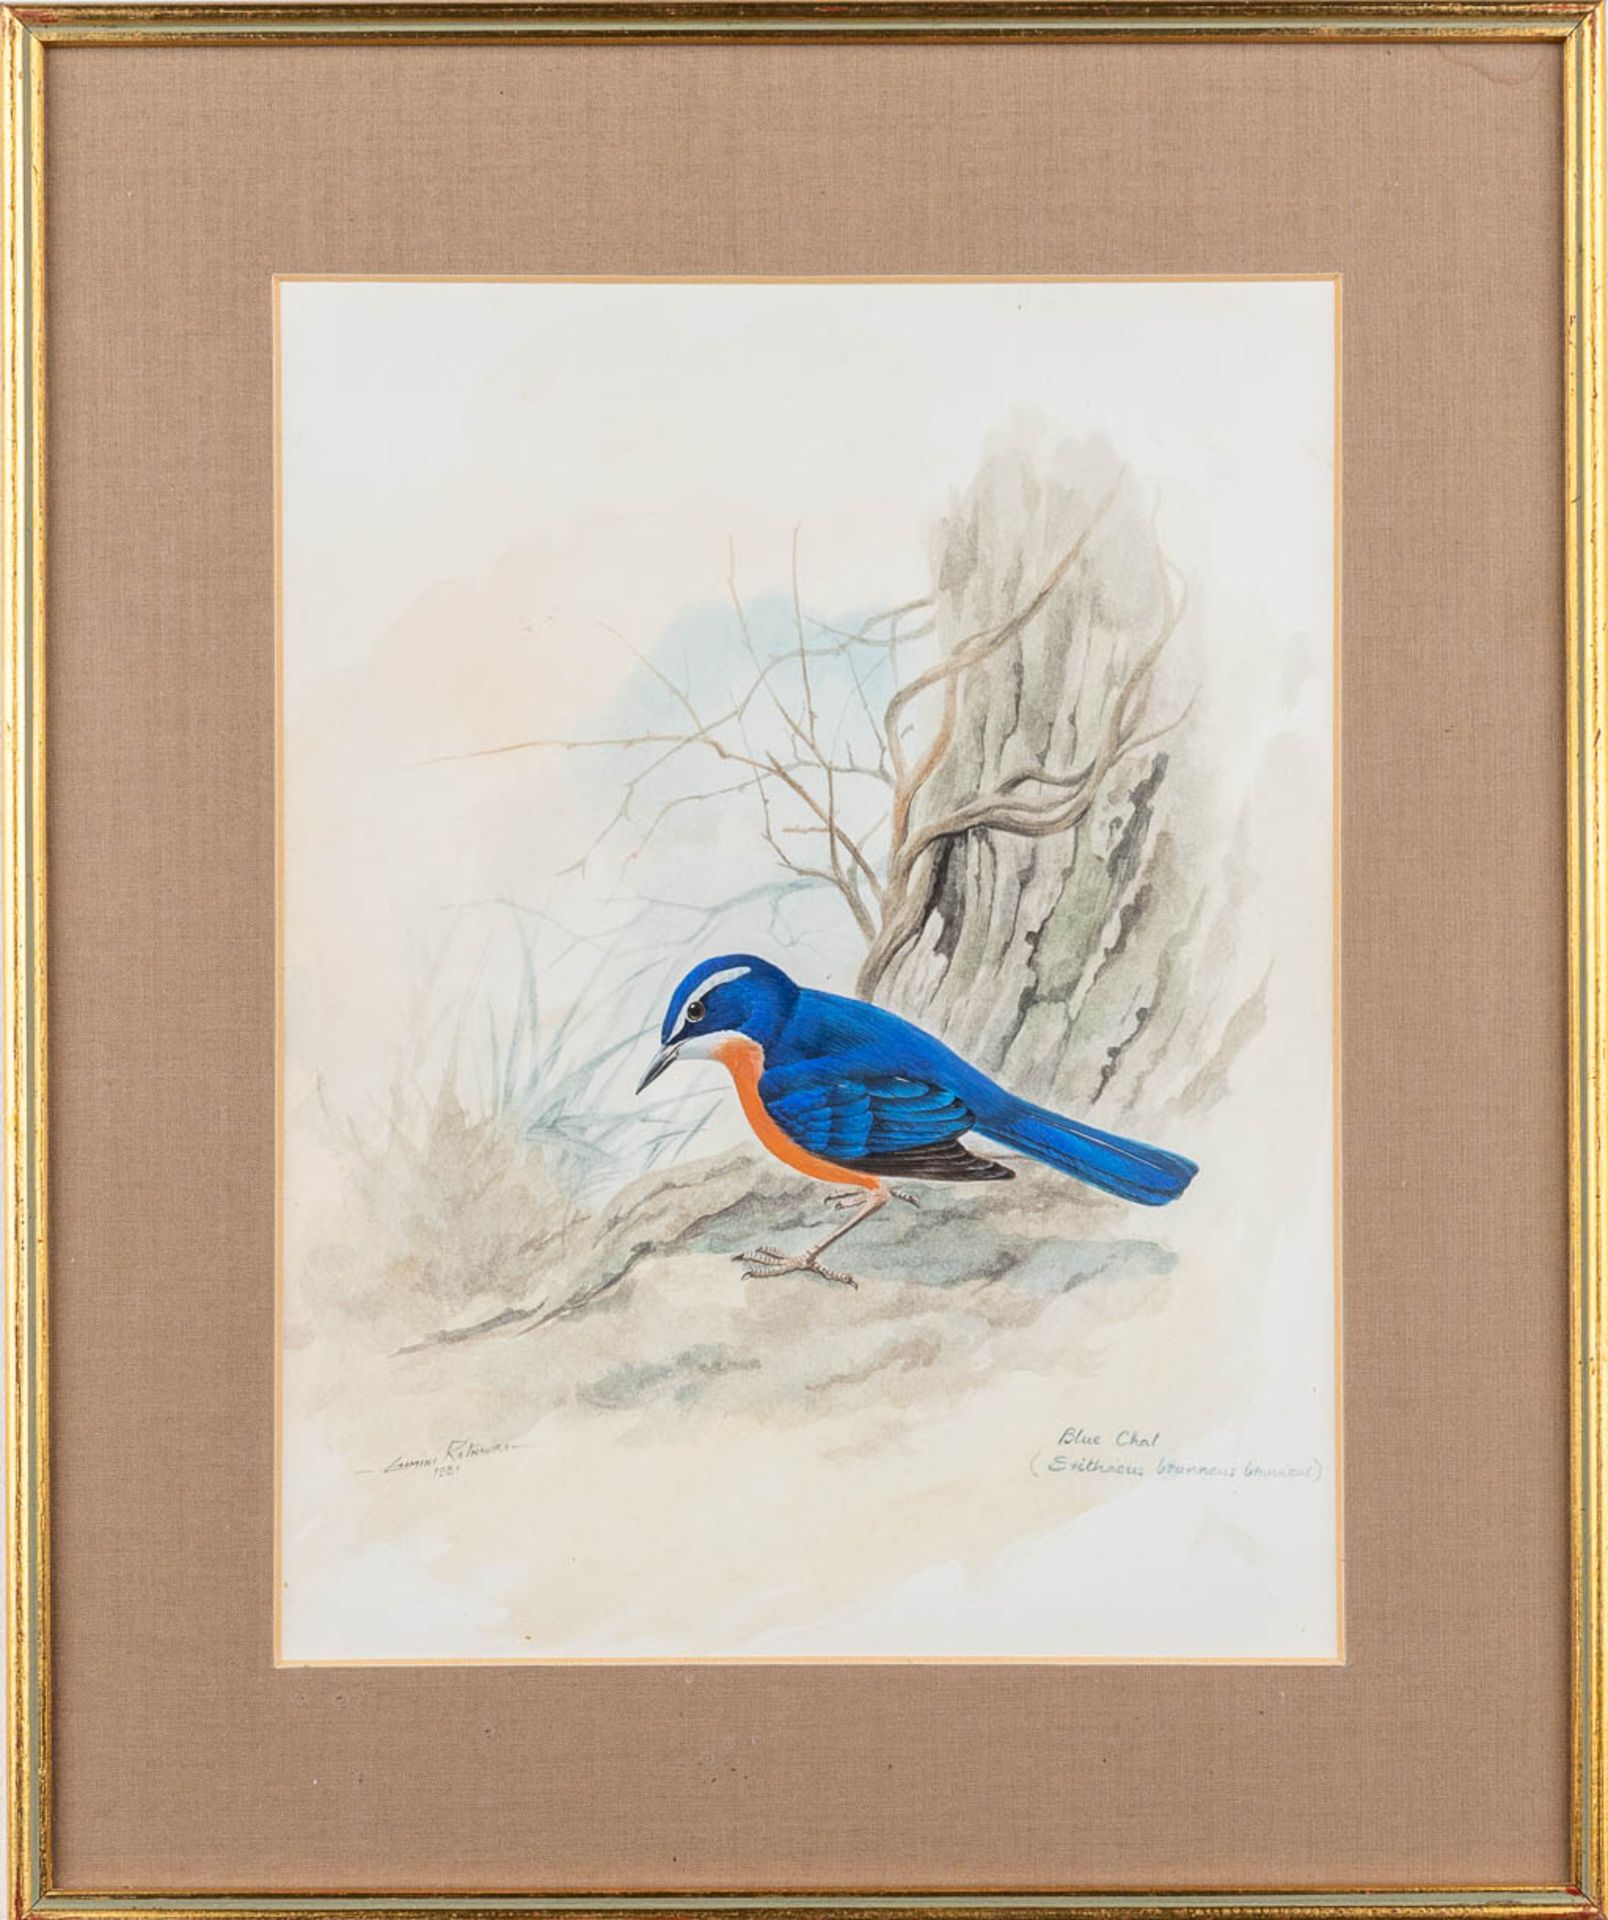 Gamini P. RATNAVIRA (1949) a collection of 4 drawings, watercolour on paper. (W: 26 x H: 34 cm) - Image 4 of 24